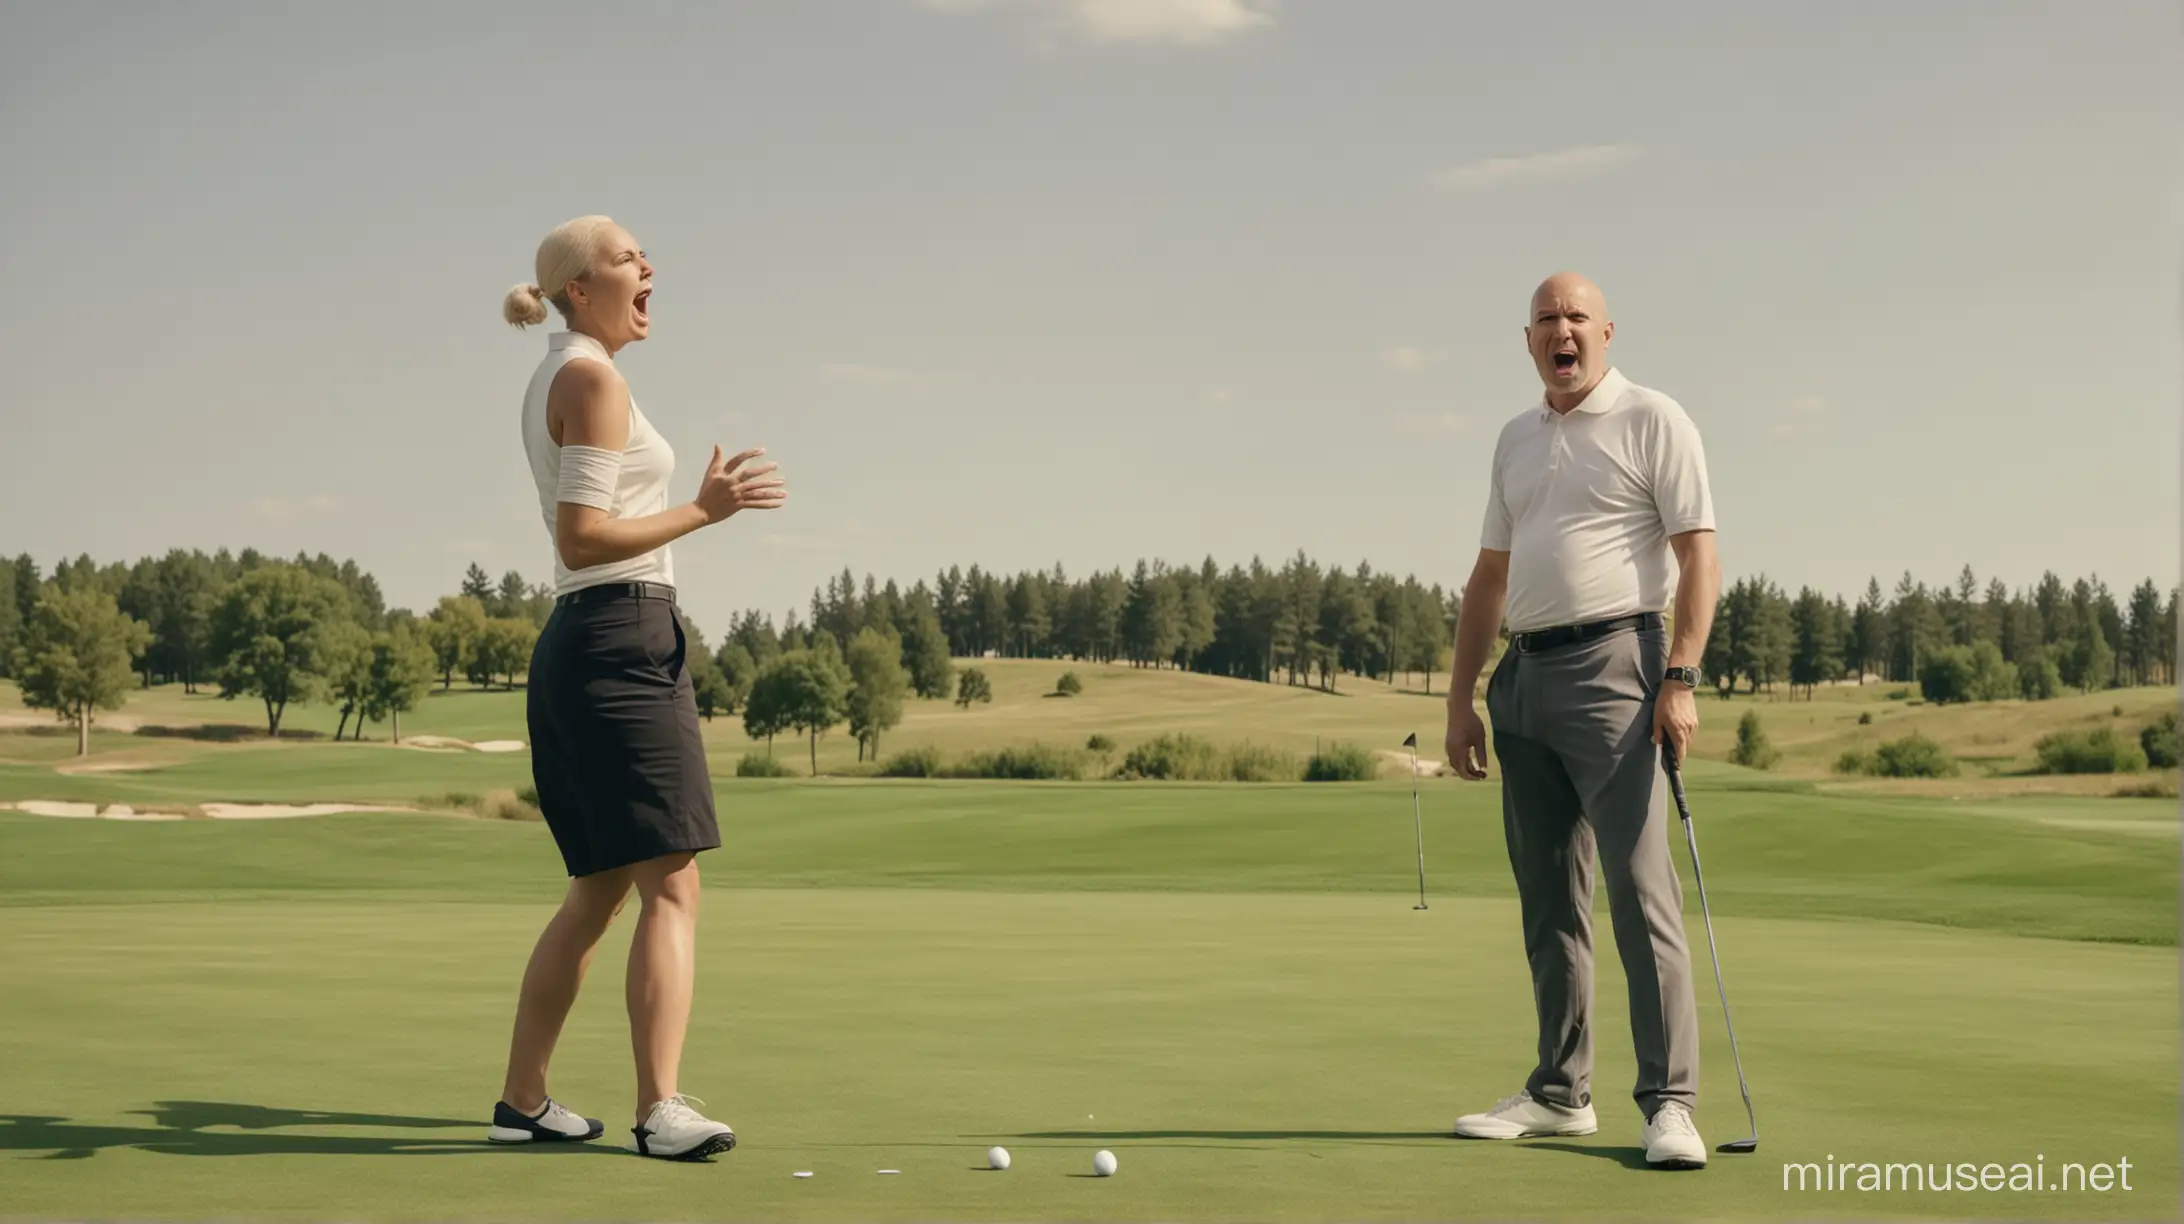 Bald Man Playing Golf on Green Course with Encouragement from Woman